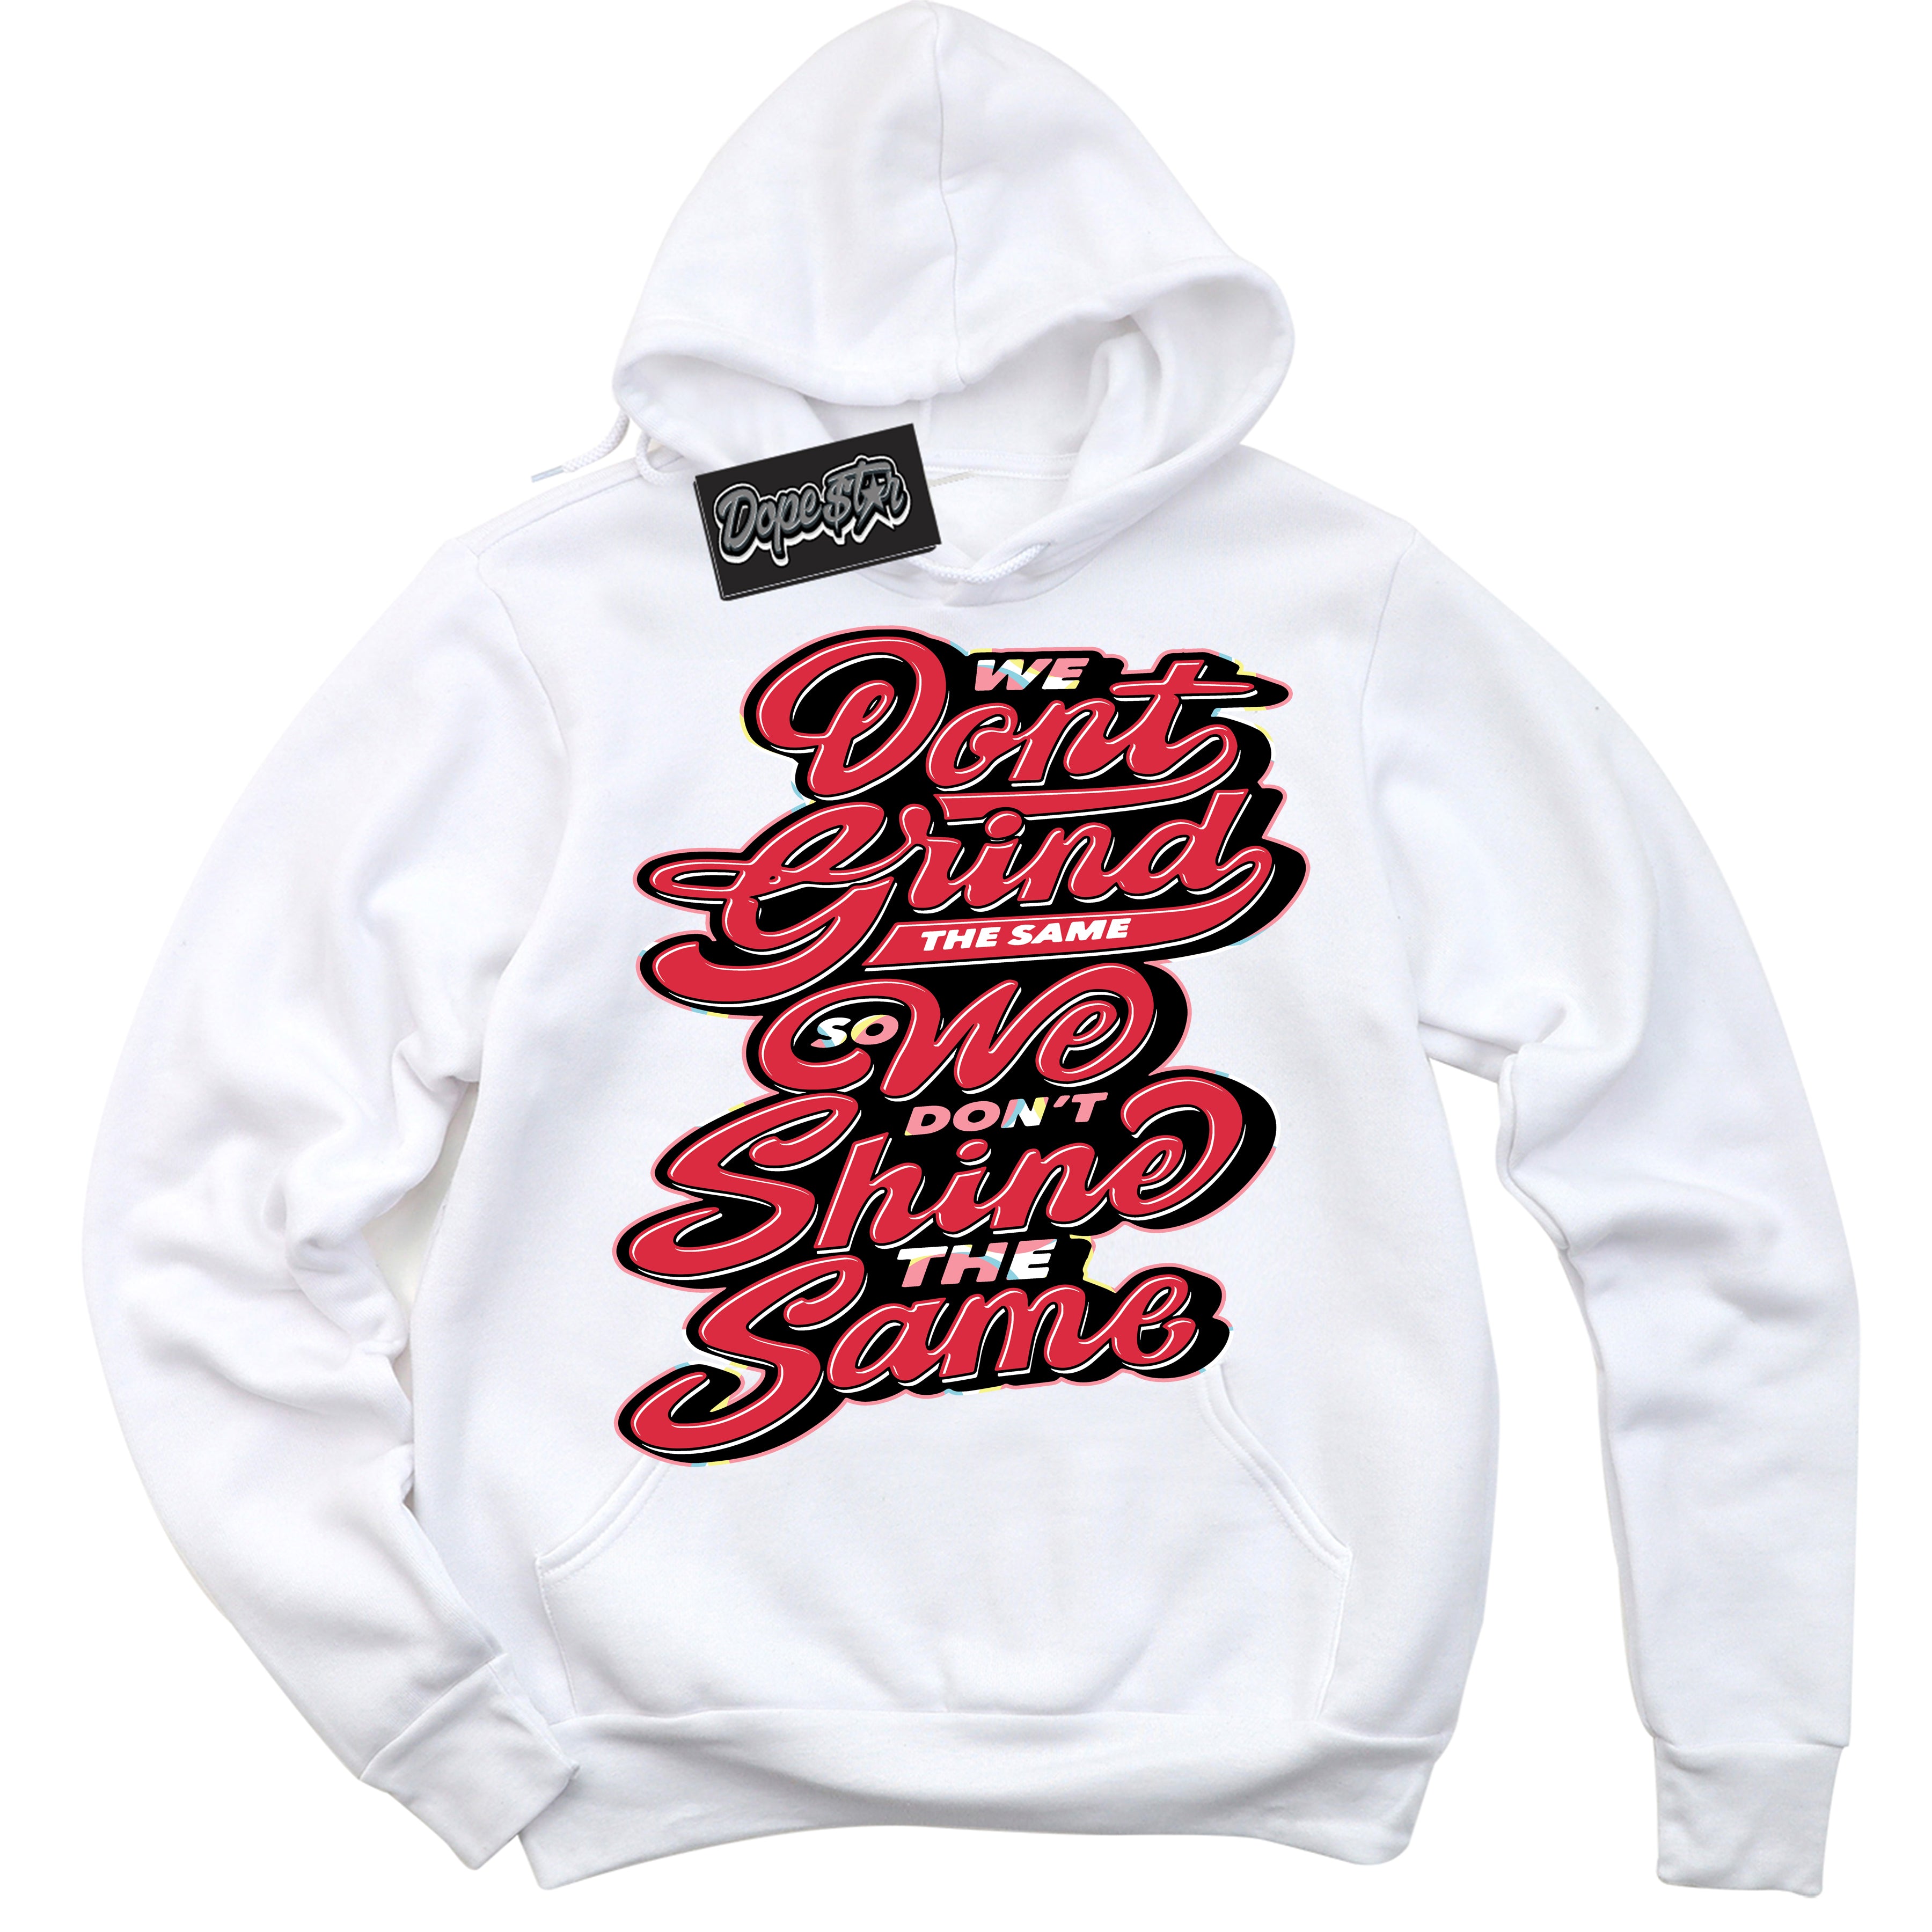 Cool White Graphic DopeStar Hoodie with “ Grind Shine “ print, that perfectly matches Spider-Verse 1s sneakers